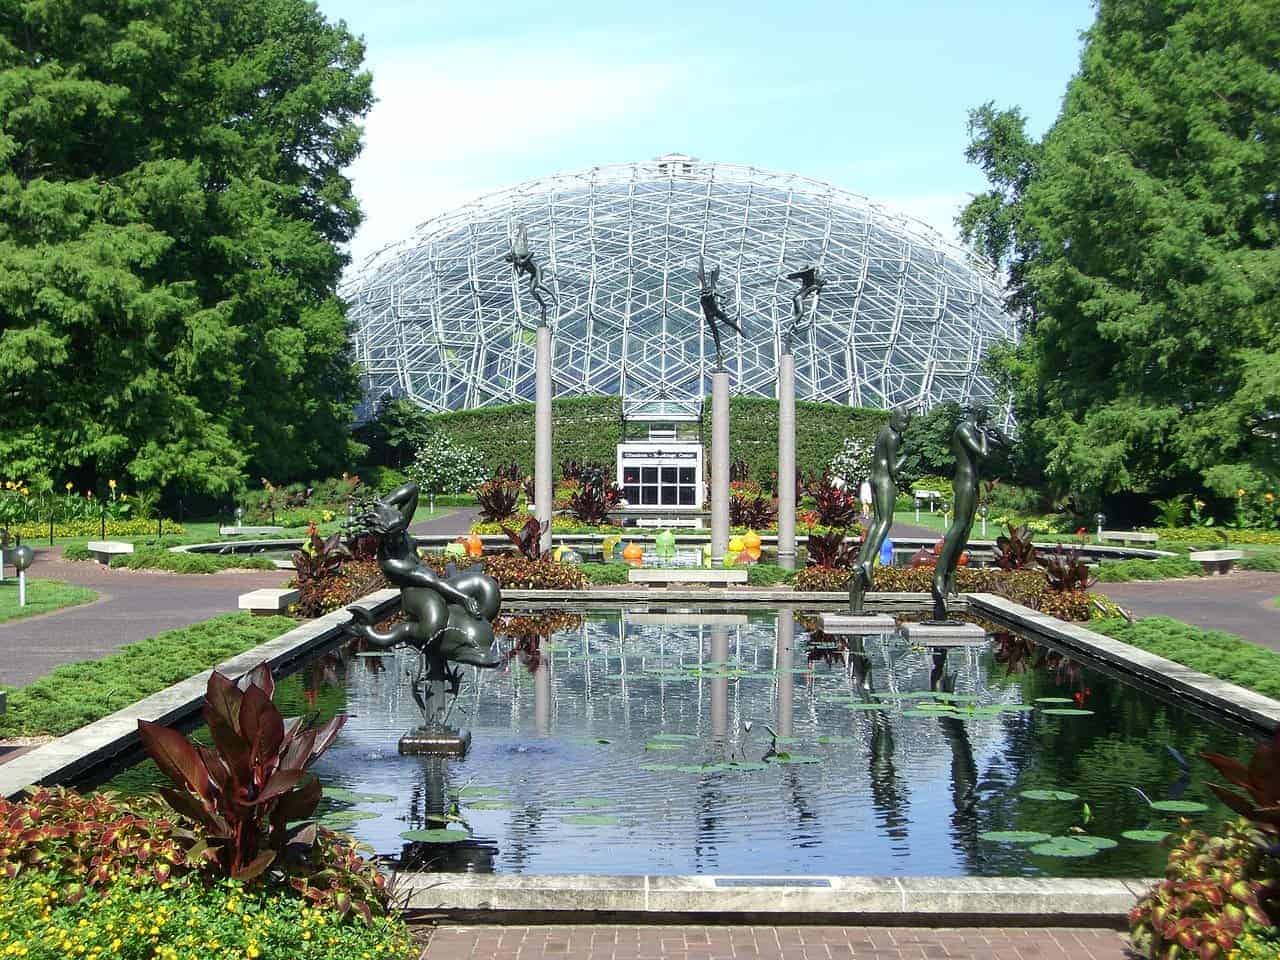 A look across the Botanical Garden with the Climatron in the background